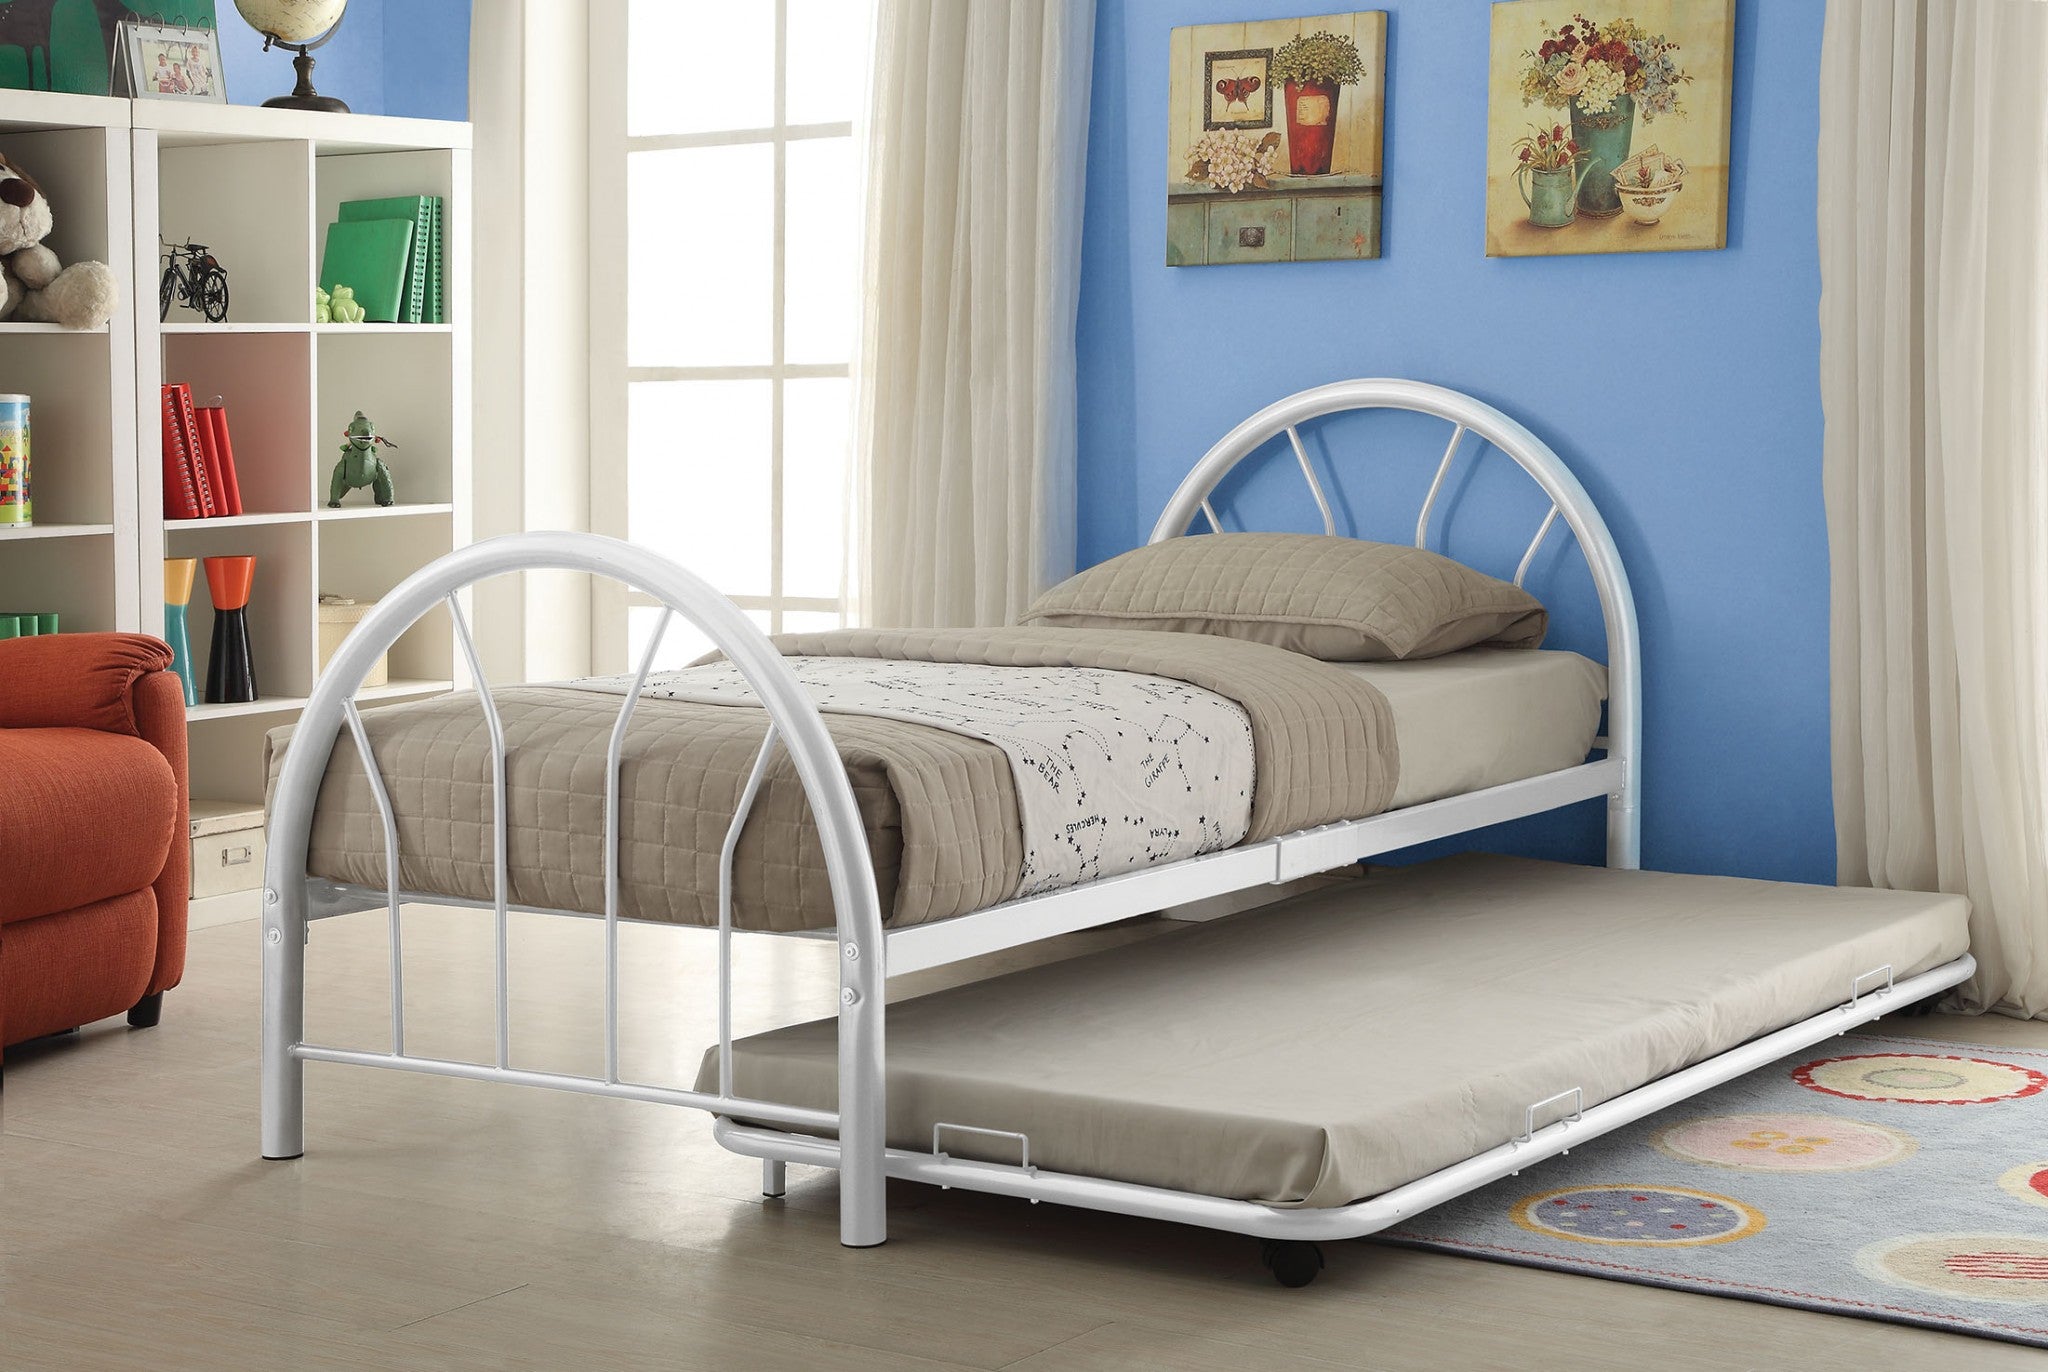 79" X 39" X 33" Twin White Silhouette Bed Default Title